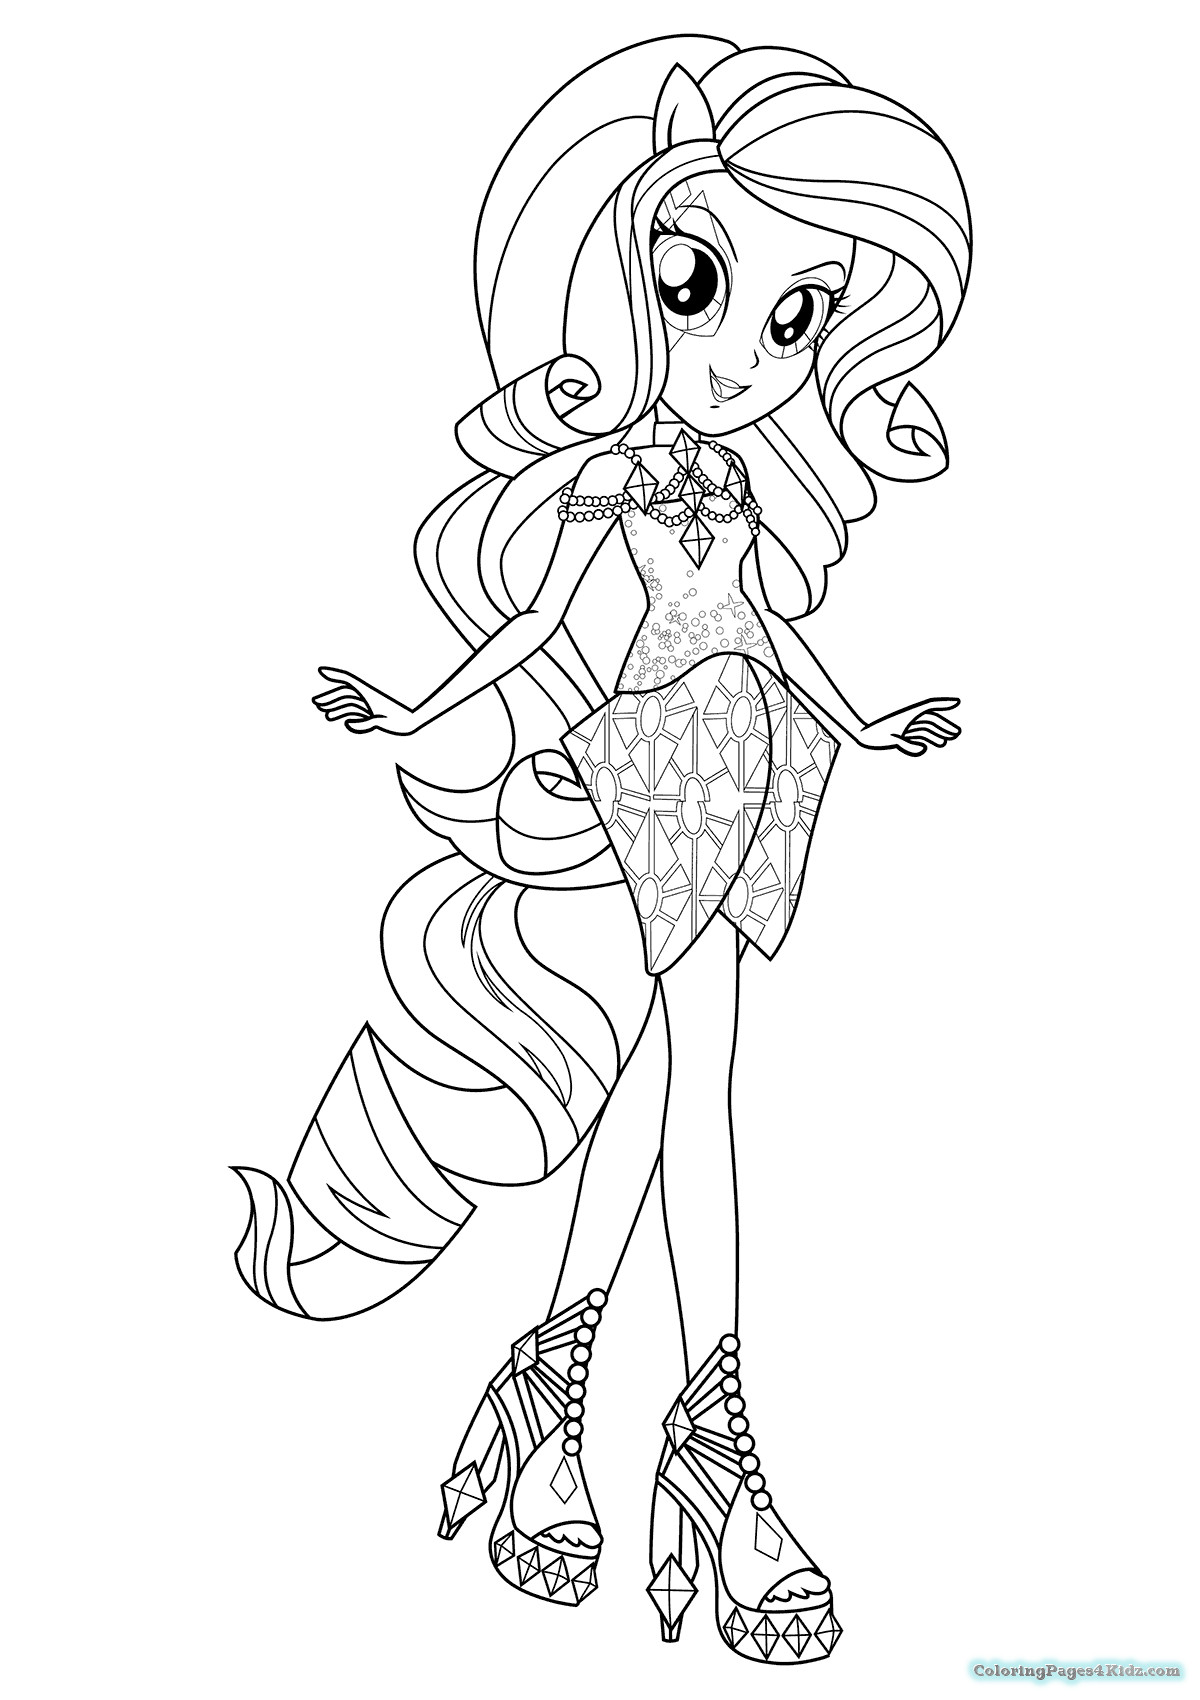 Equestria Girls Rainbow Rocks Coloring Pages
 Rainbow Rocks Equestria Girls Coloring Pages Sketch